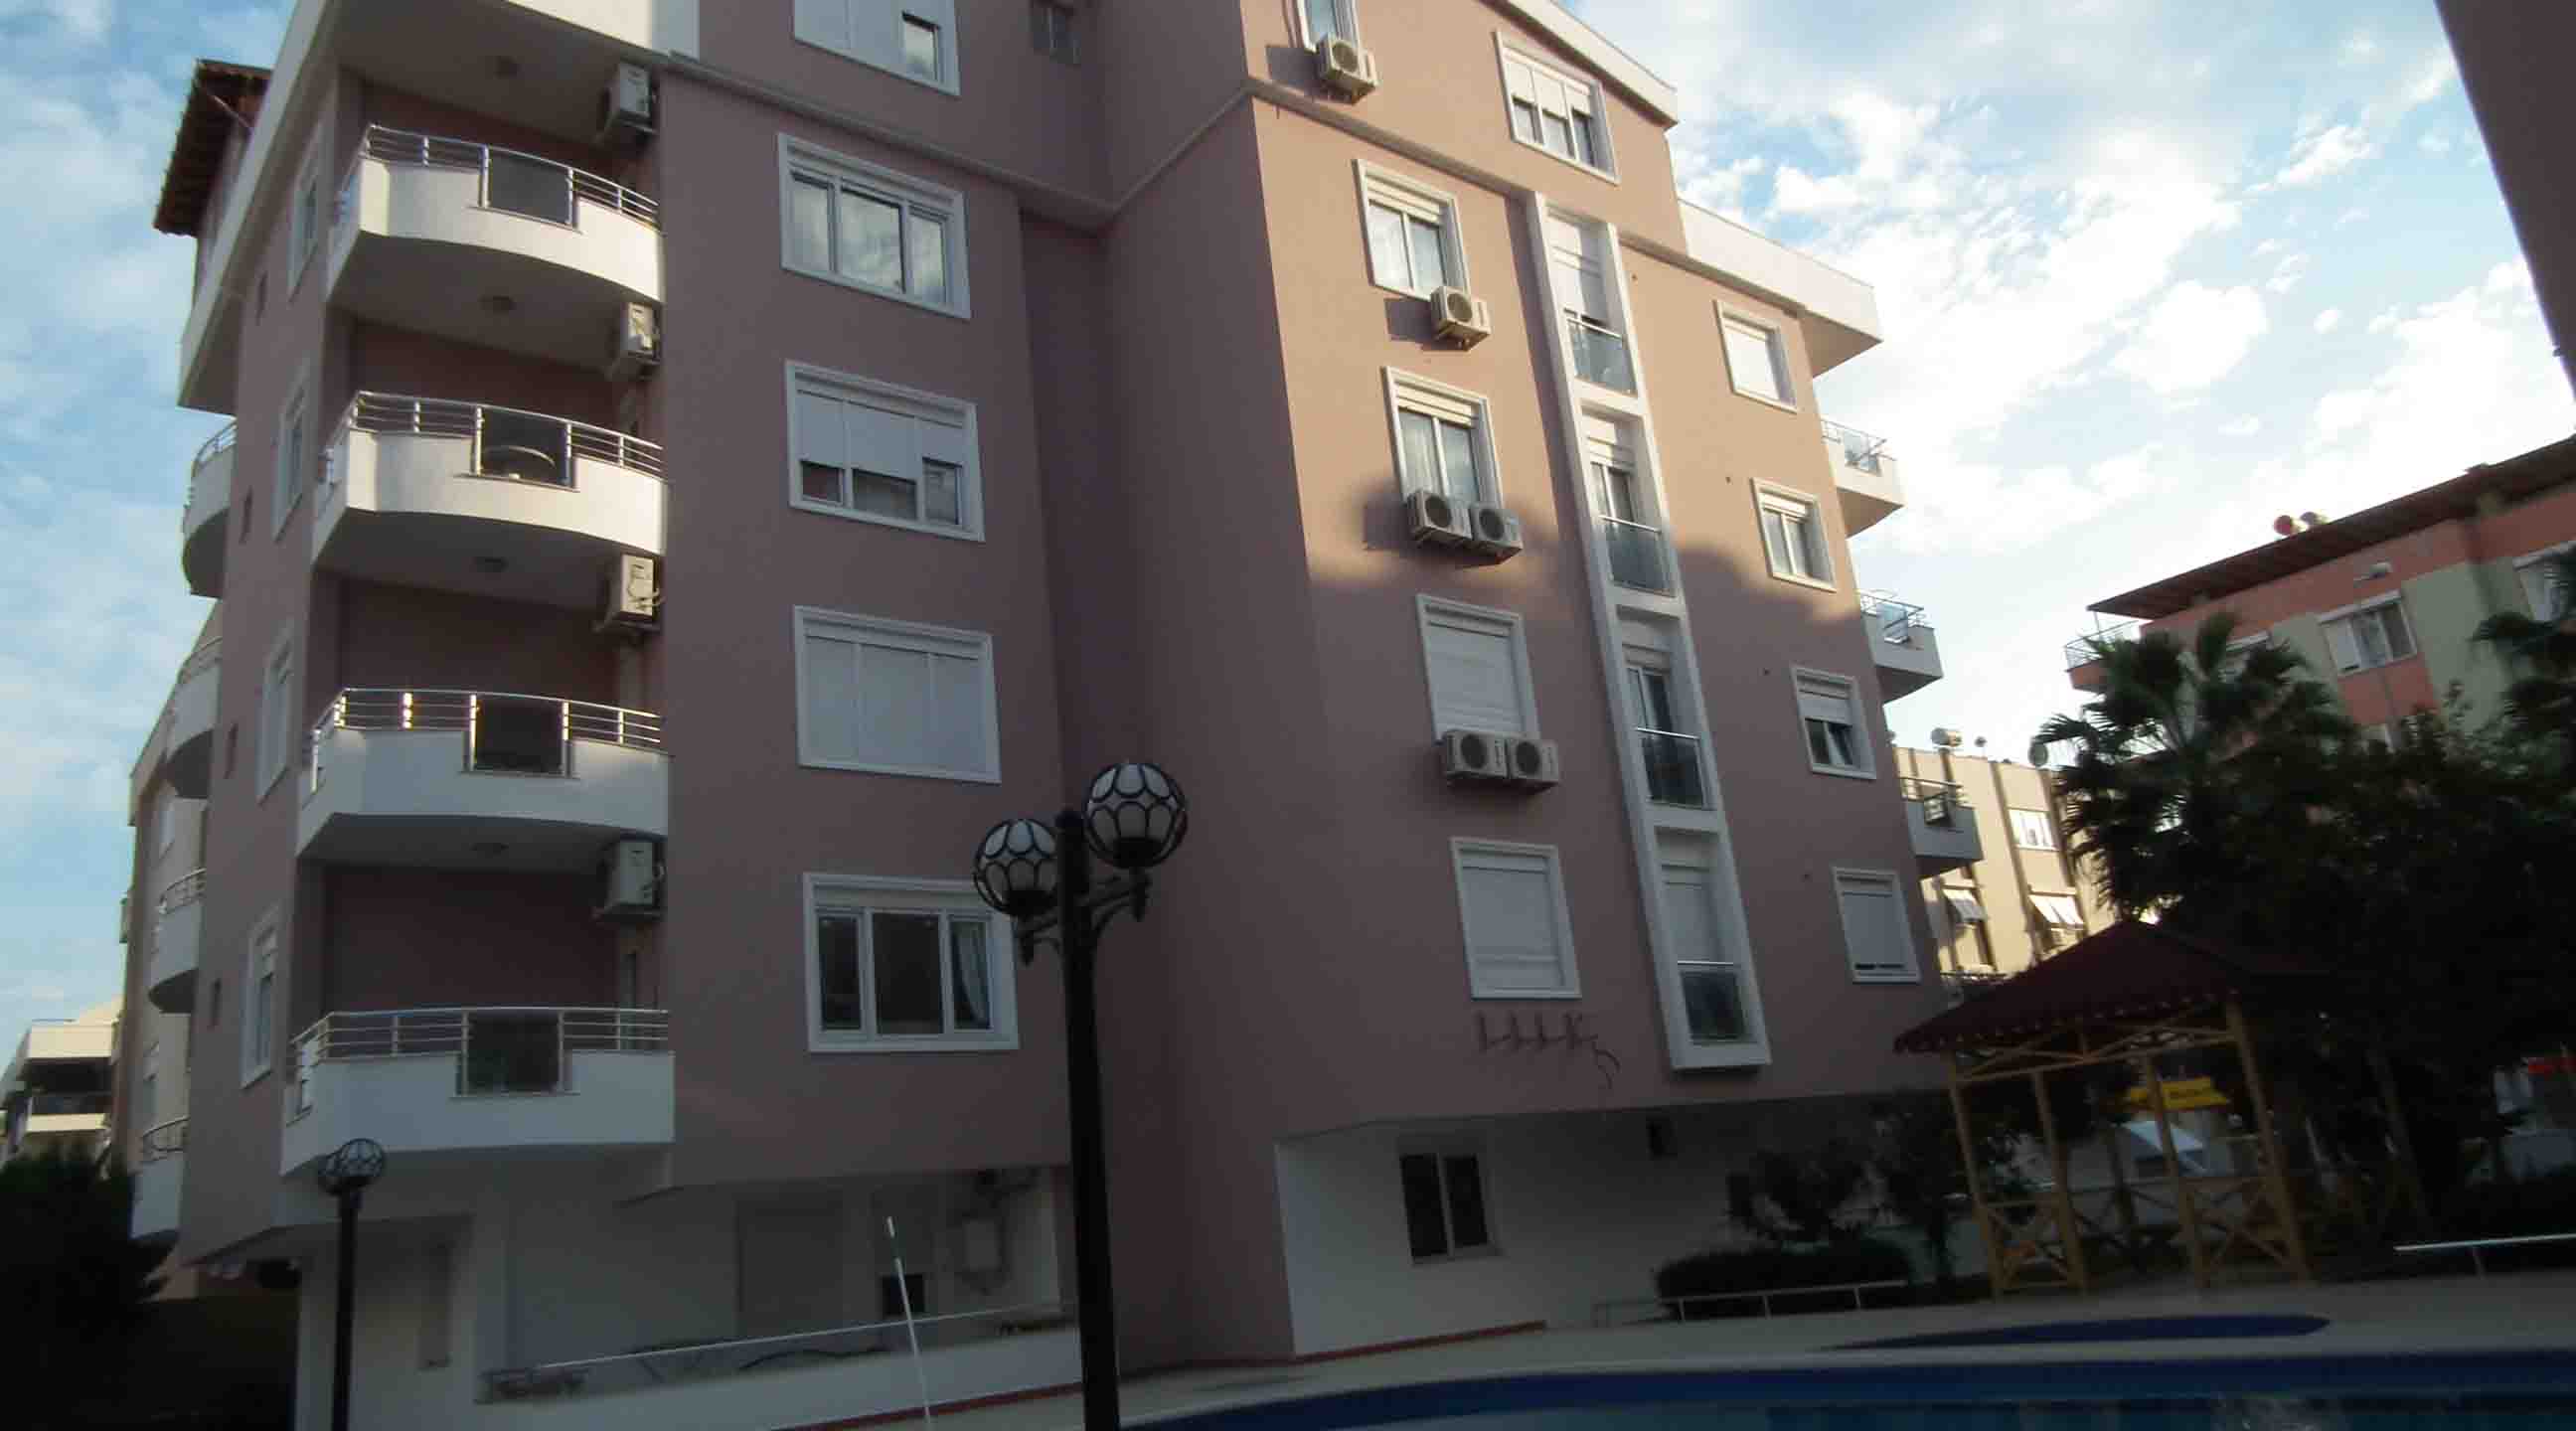 Real Estate House in Antalya Turkey for sale 5